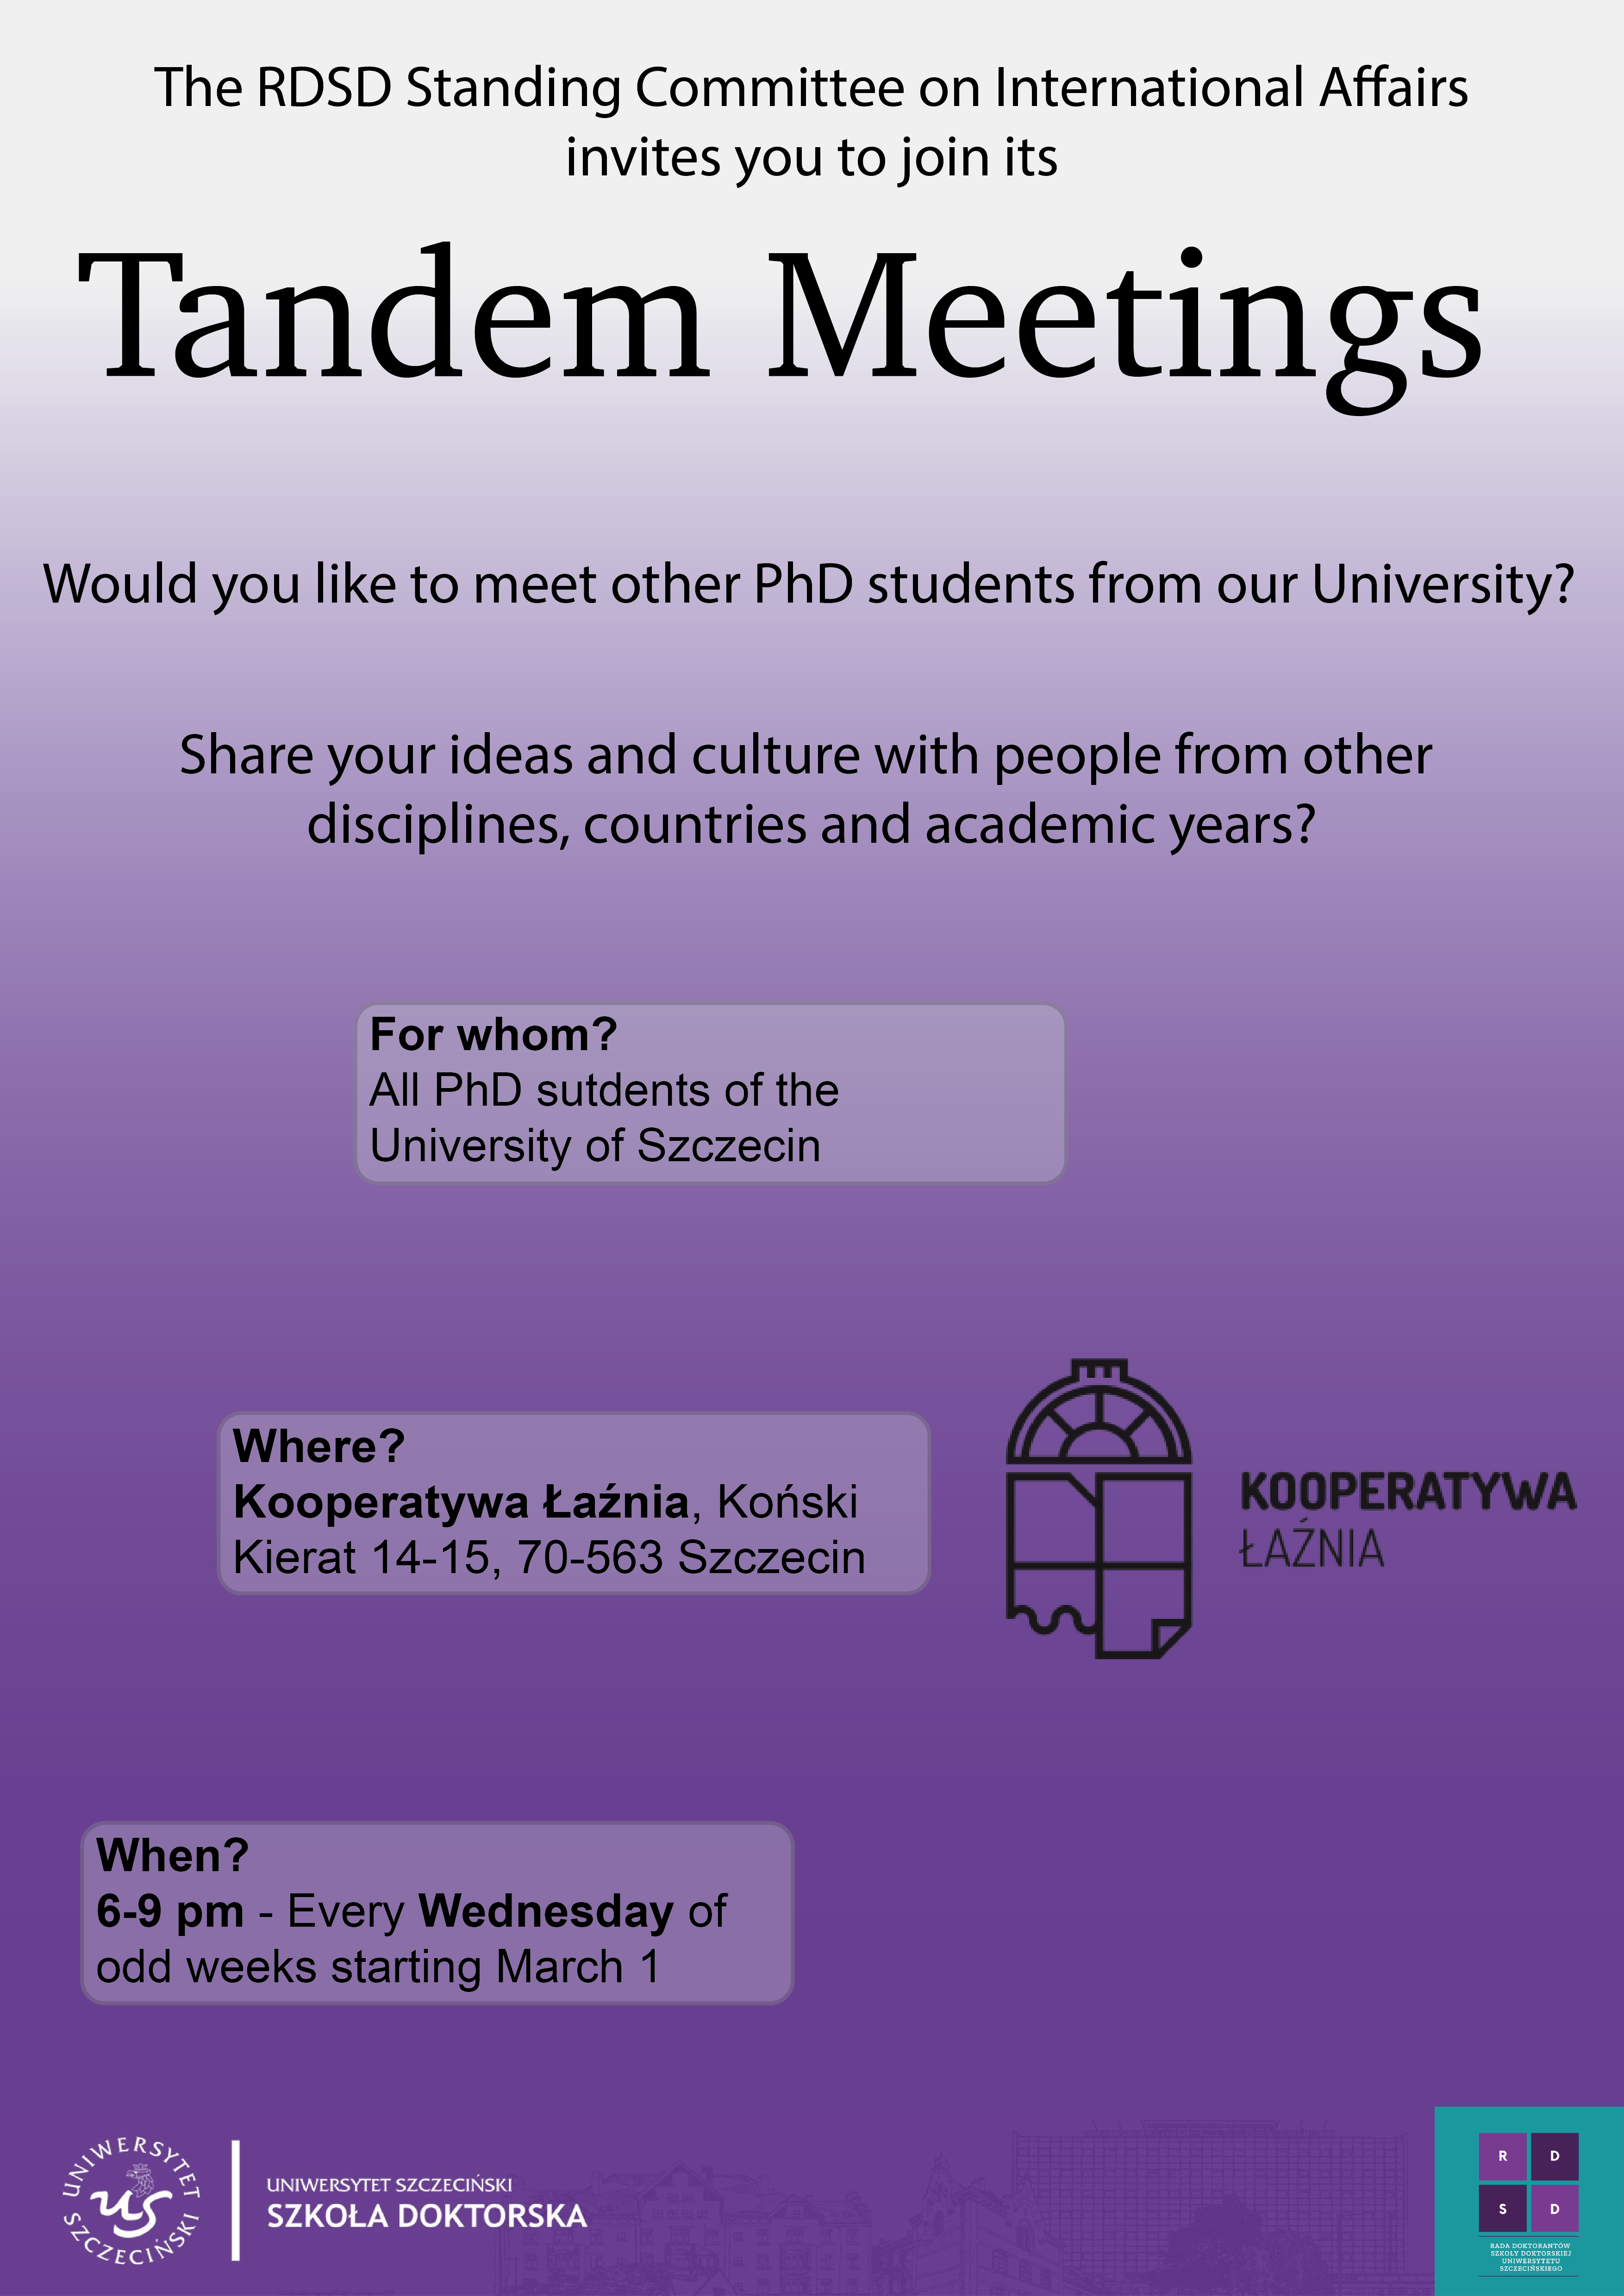 Tandem meetings for PhD students of the University of Szczecin